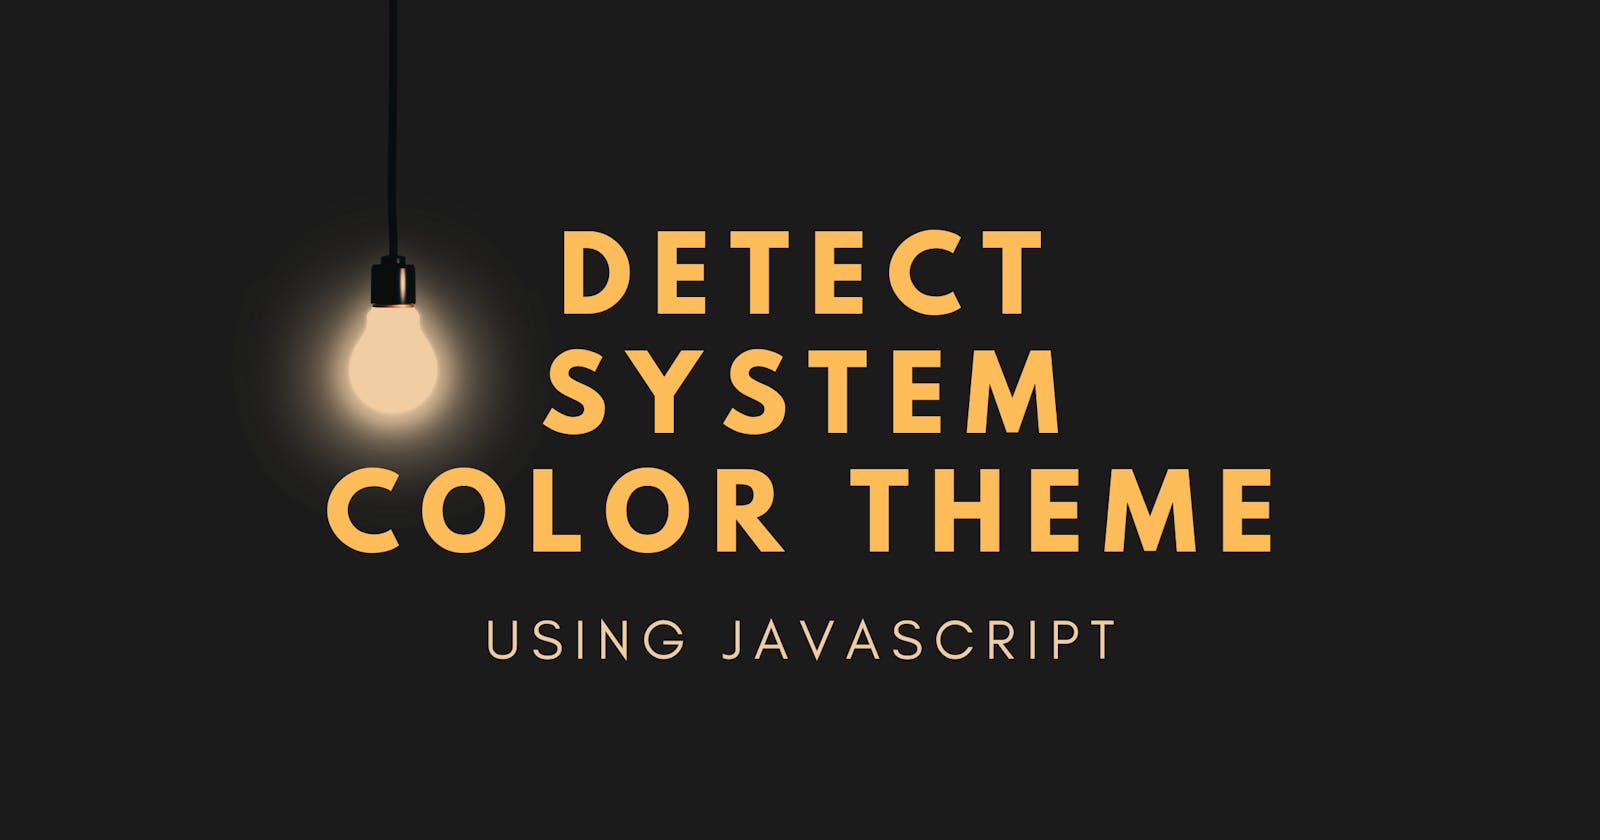 System Color Theme Check In JavaScript